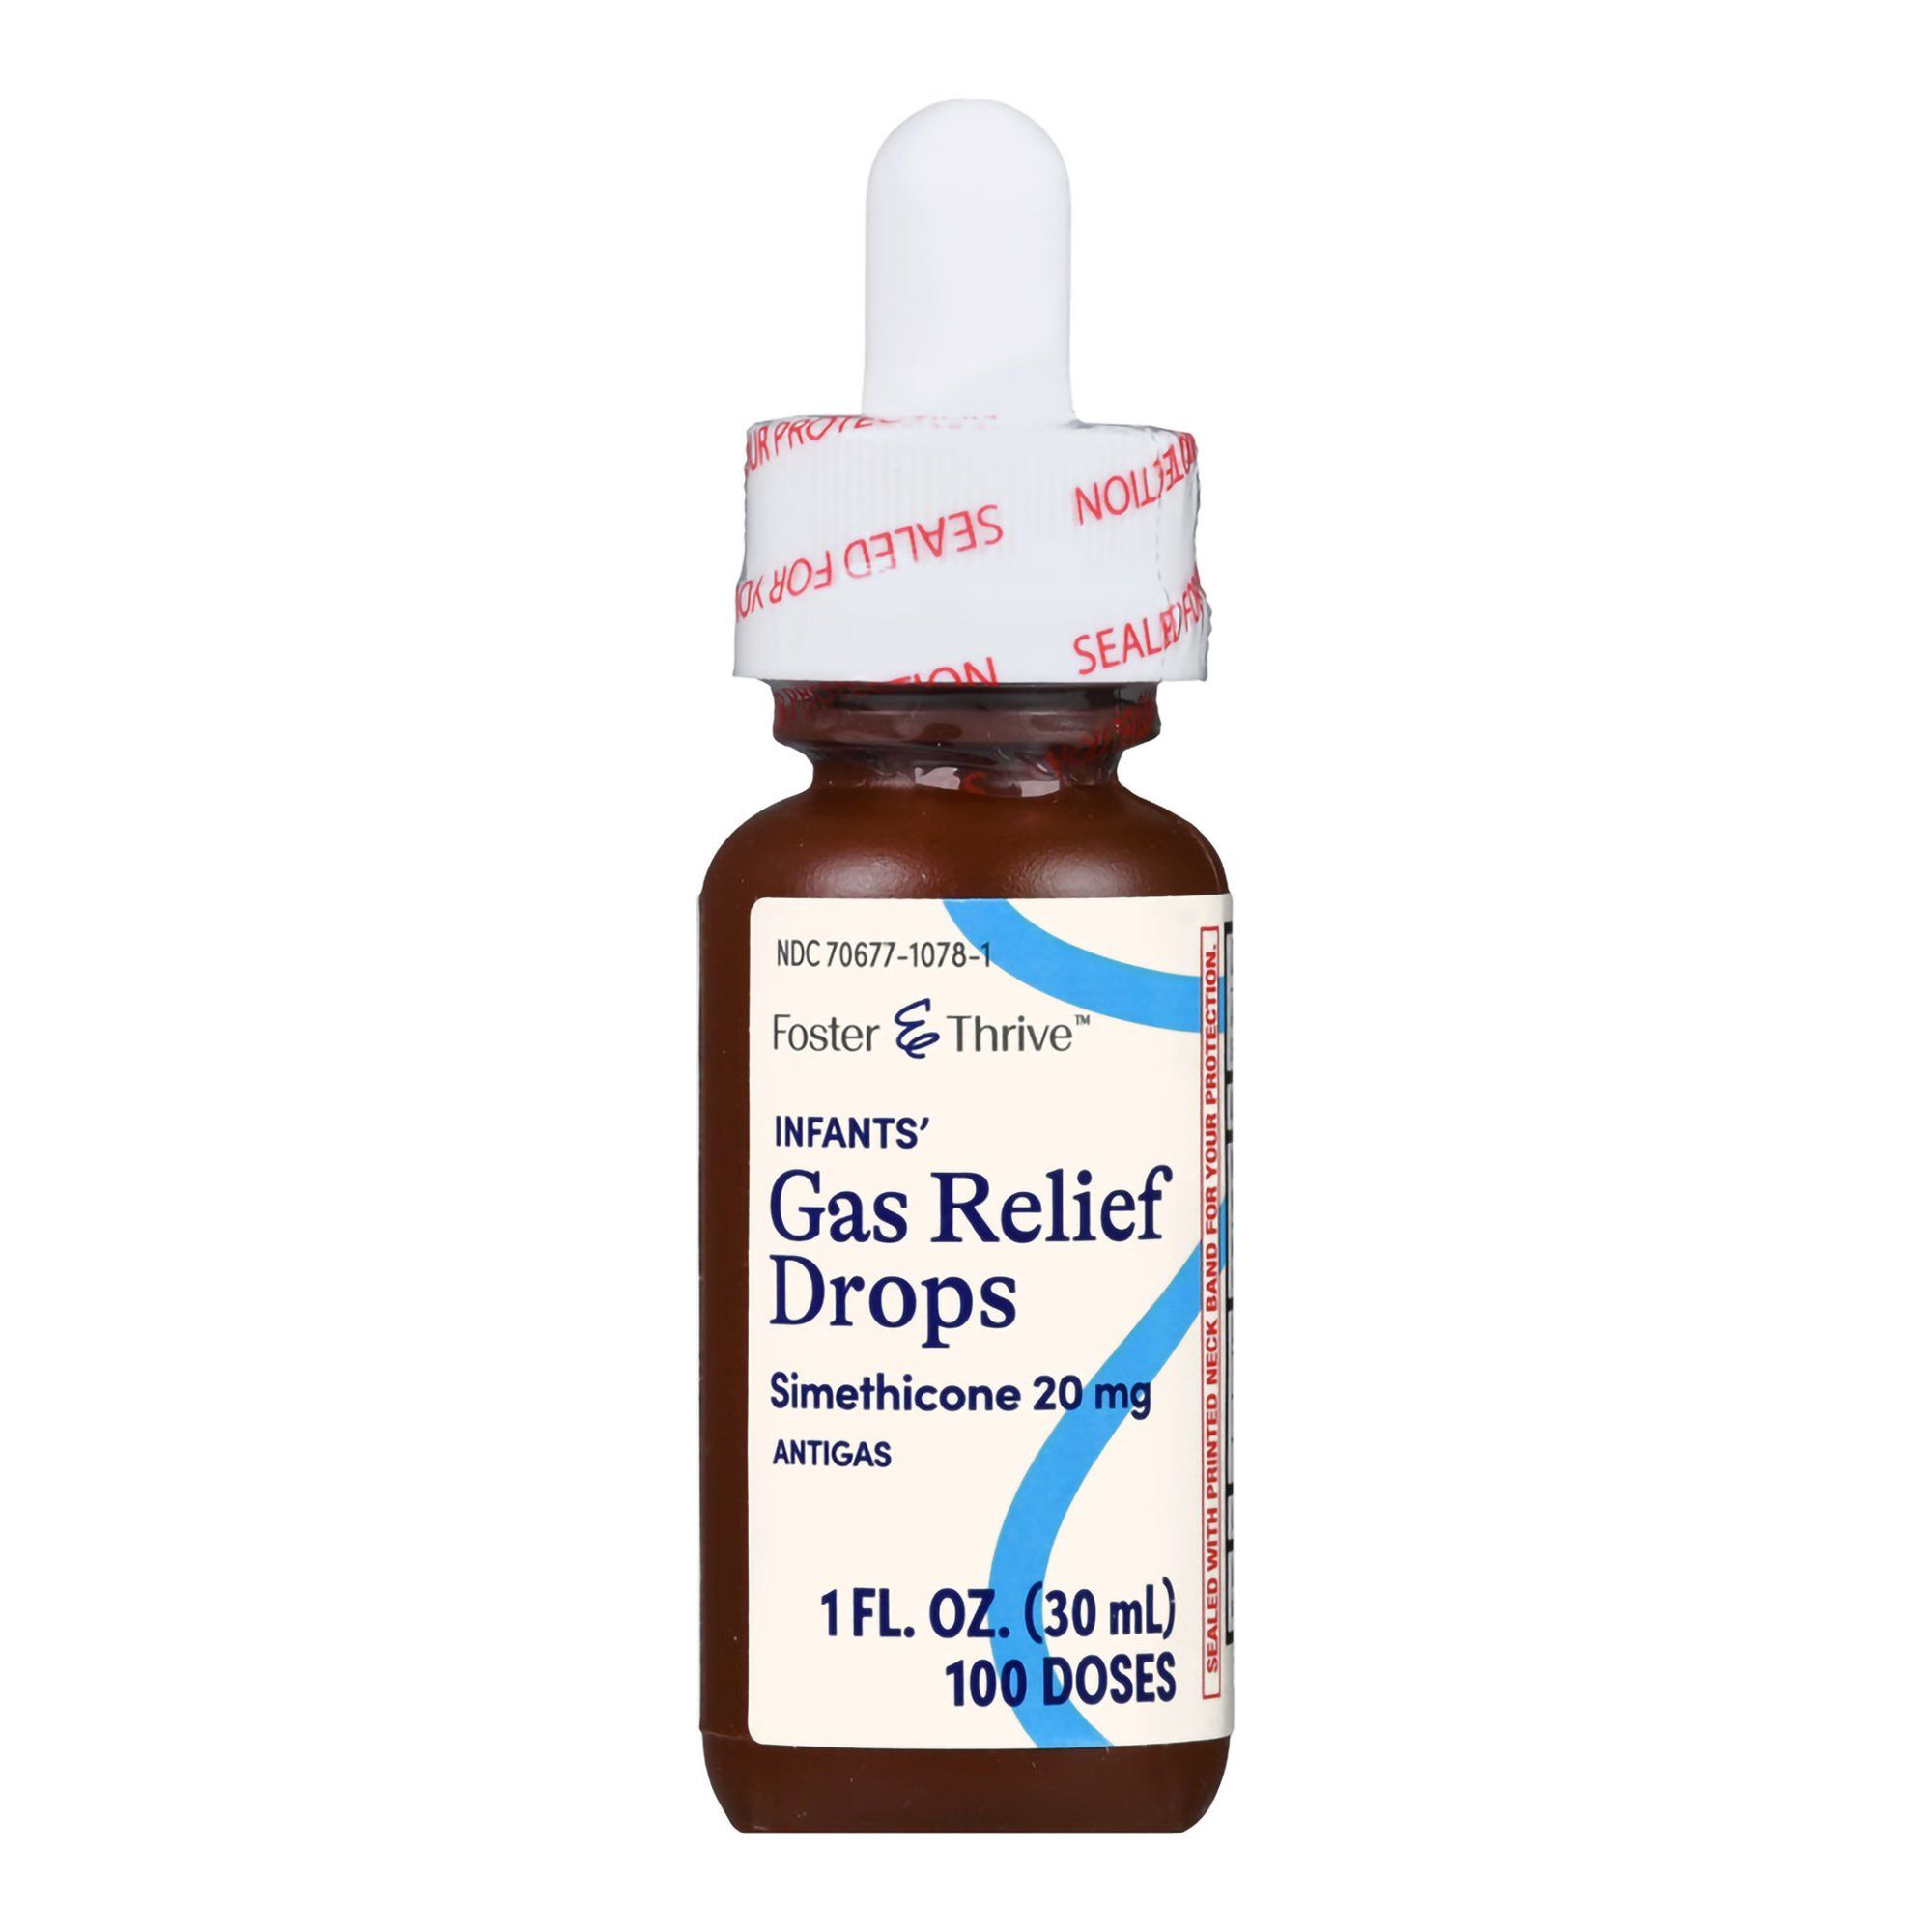 Foster & Thrive Infants' Gas Relief Simethicone Drops, 20 mg - 1 fl oz